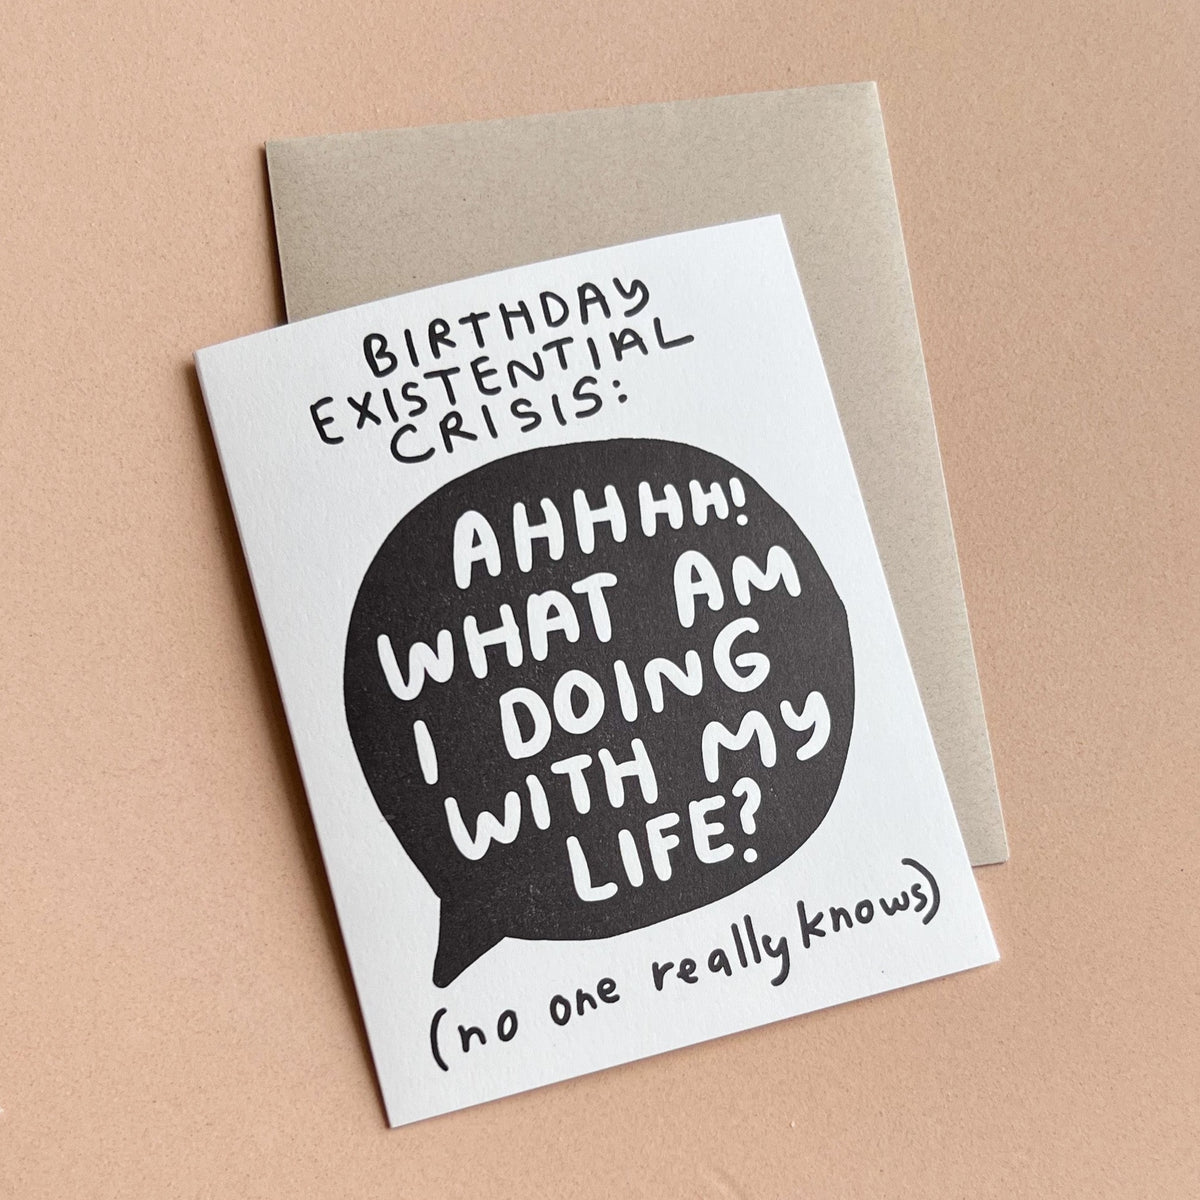 Birthday Existential Crisis Card